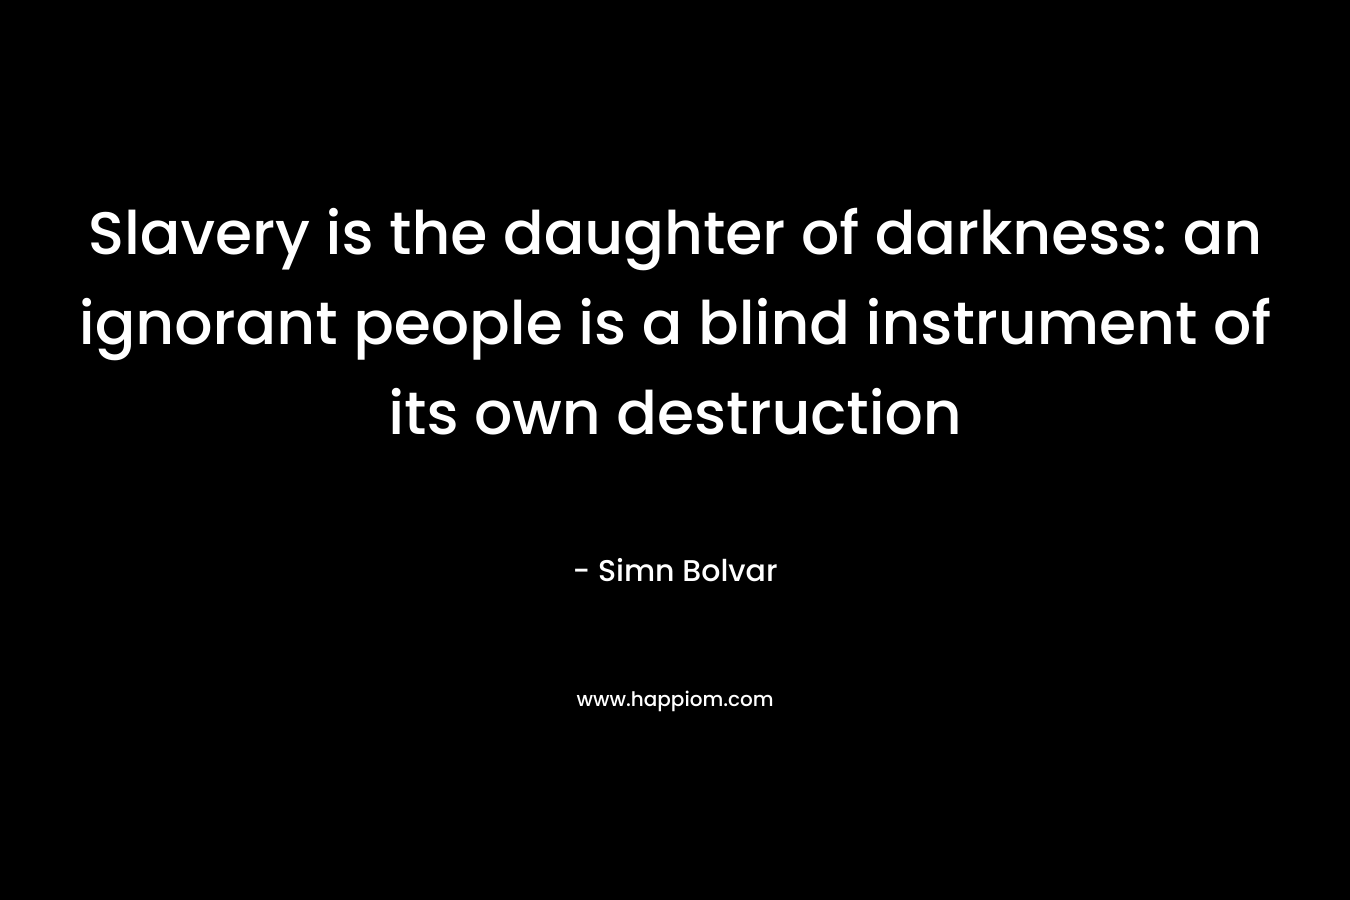 Slavery is the daughter of darkness: an ignorant people is a blind instrument of its own destruction